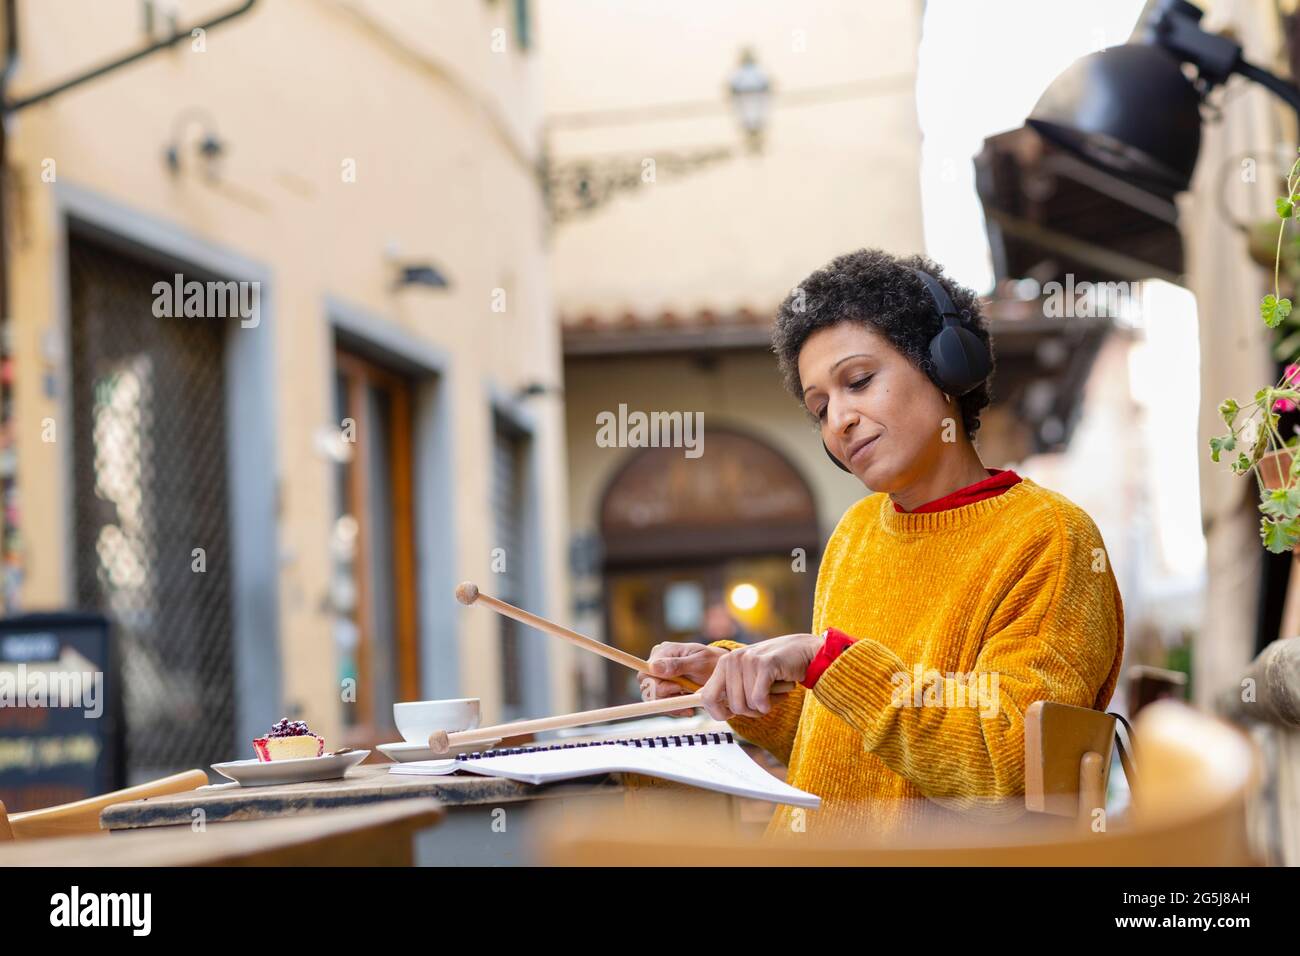 Italy, Tuscany, Pistoia, Woman practicing with drumsticks in outdoor cafe Stock Photo